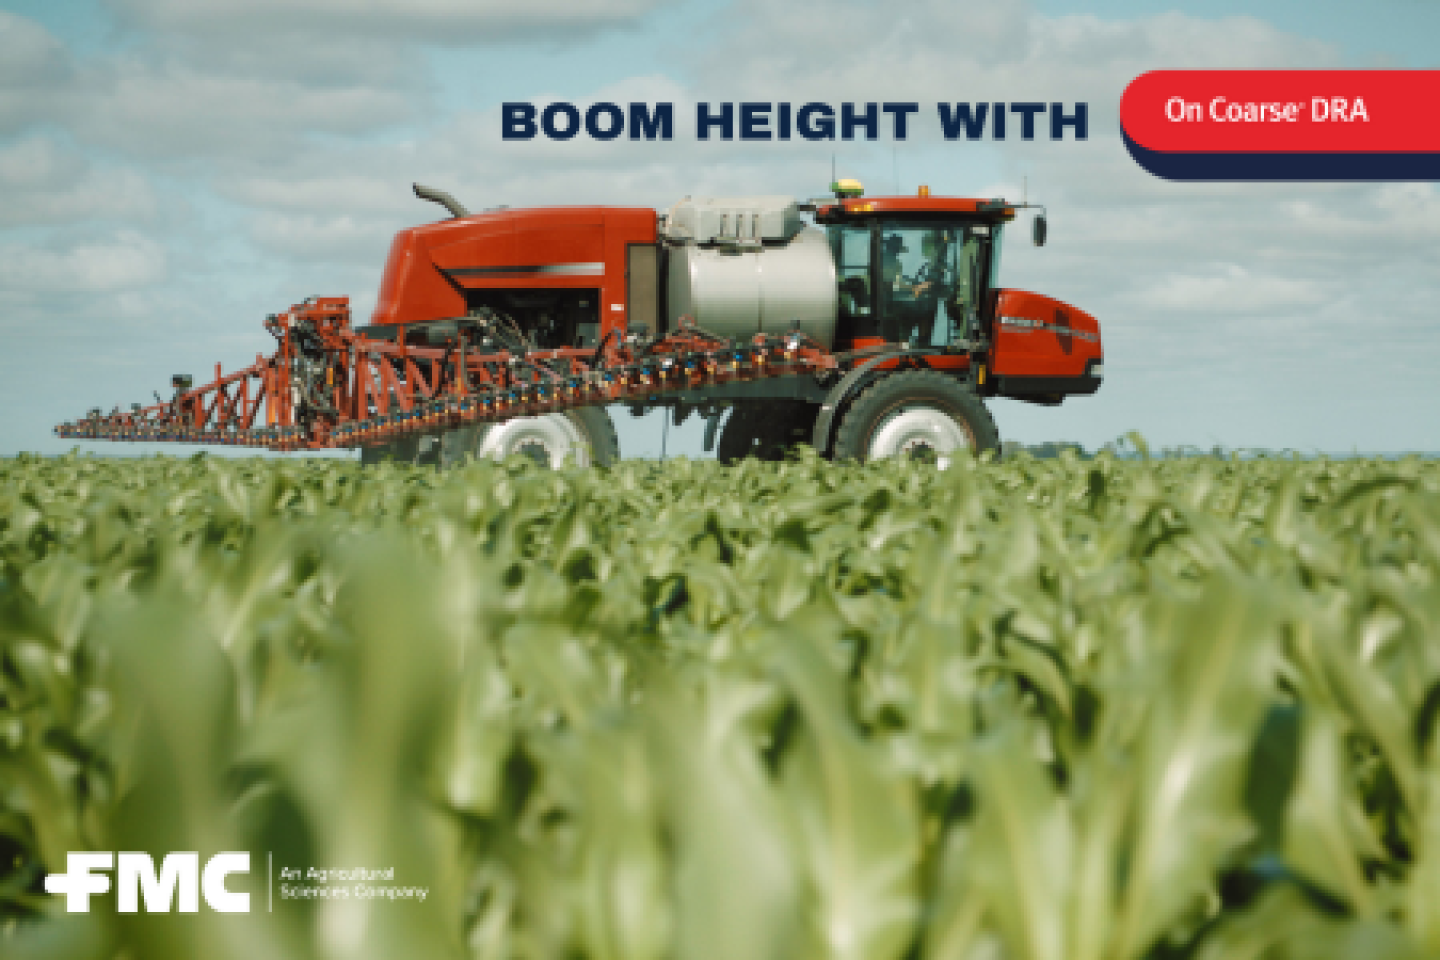 Boom height with On Coarse®